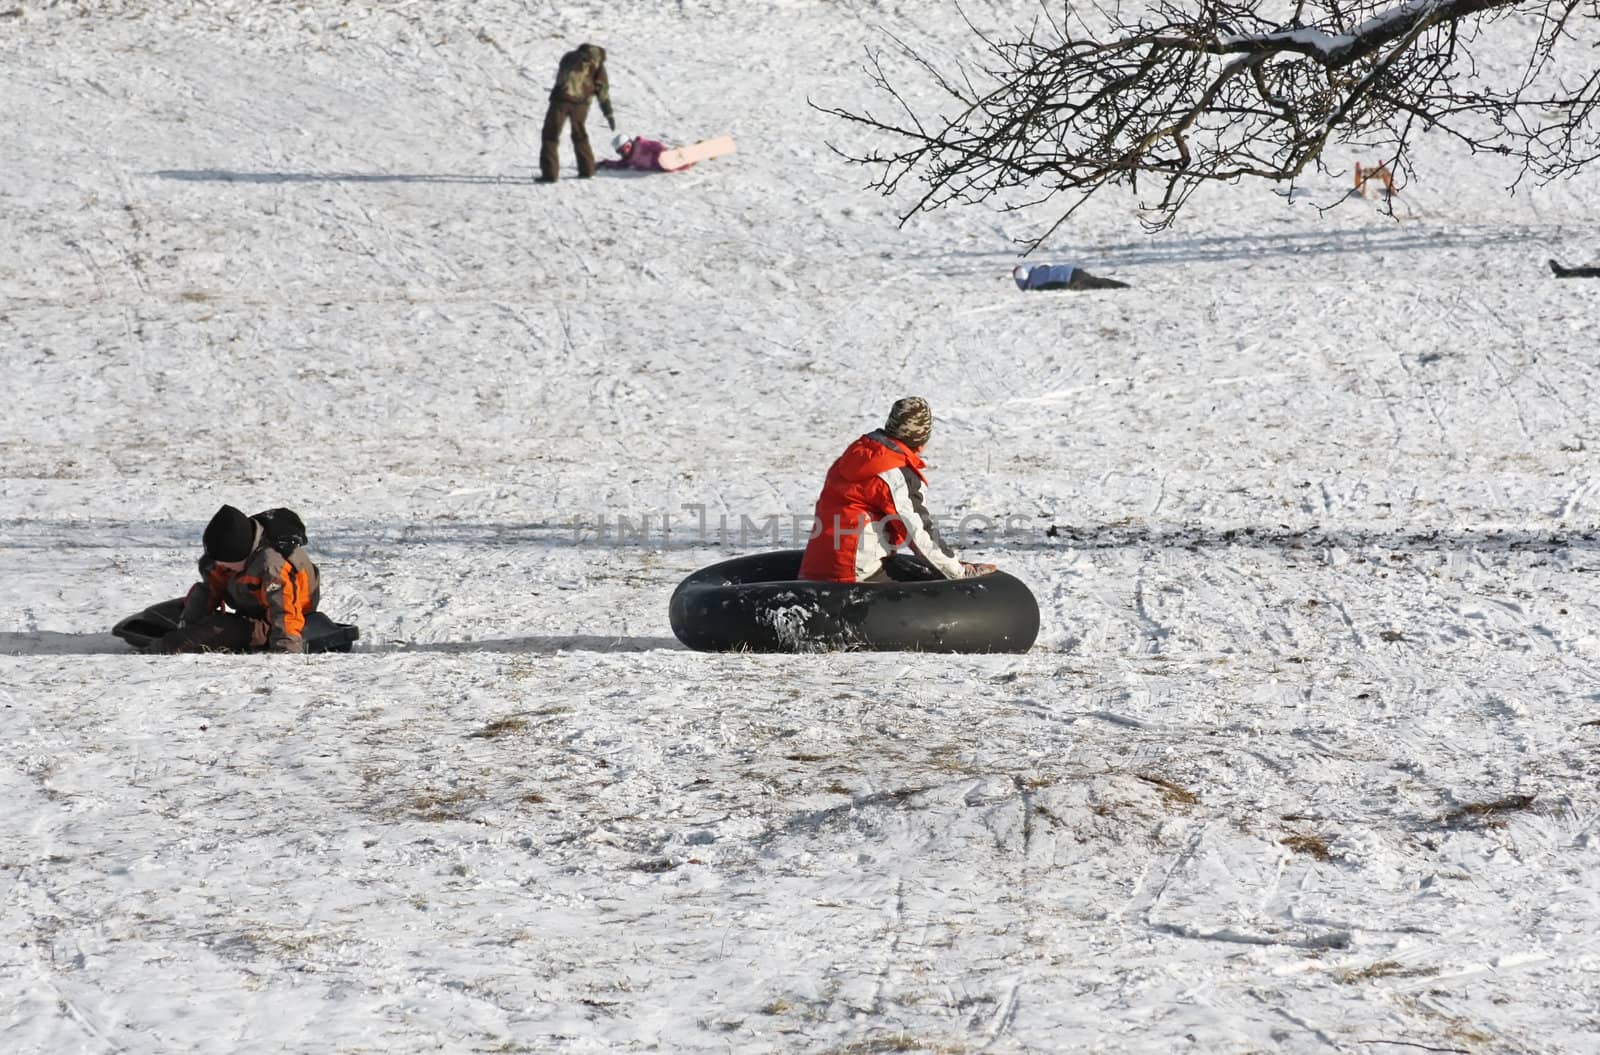 This image shows playing children in winter